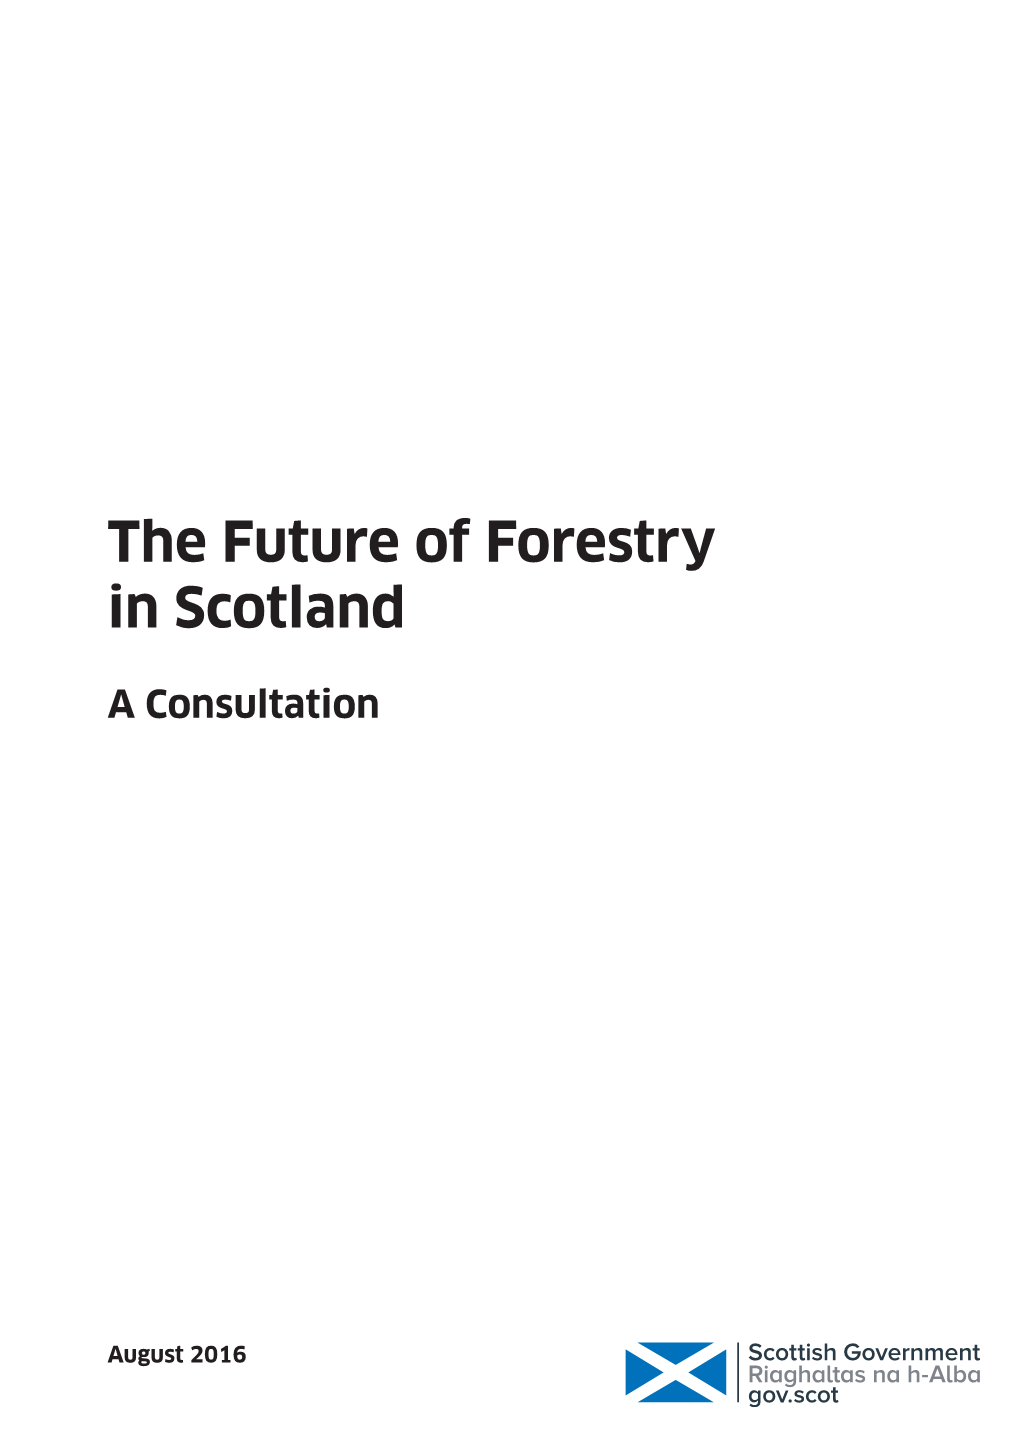 The Future of Forestry in Scotland